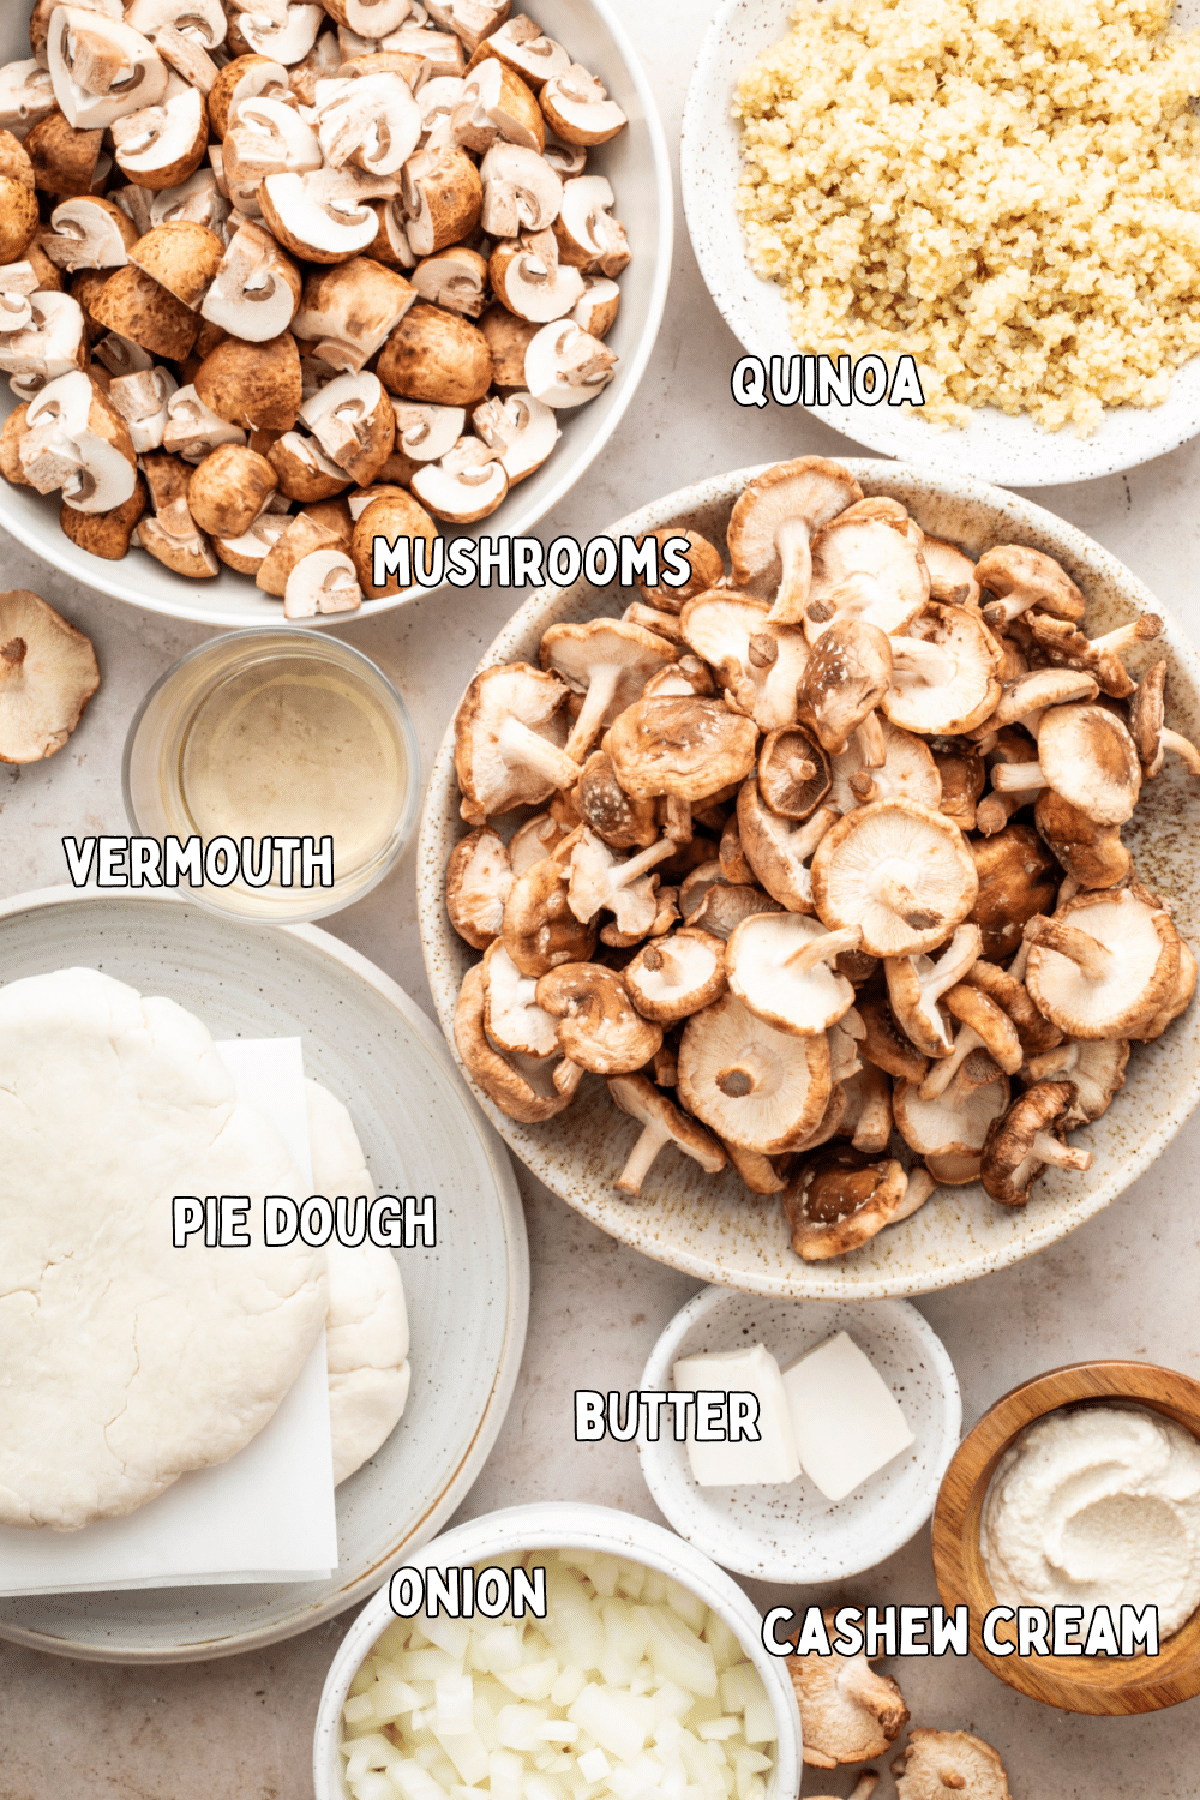 Overhead view of various bowls of ingredients to make a mushroom quinoa pie: two kinds of mushrooms, cooked quinoa, vermouth, pie dough, butter, cashew cream, and onions.